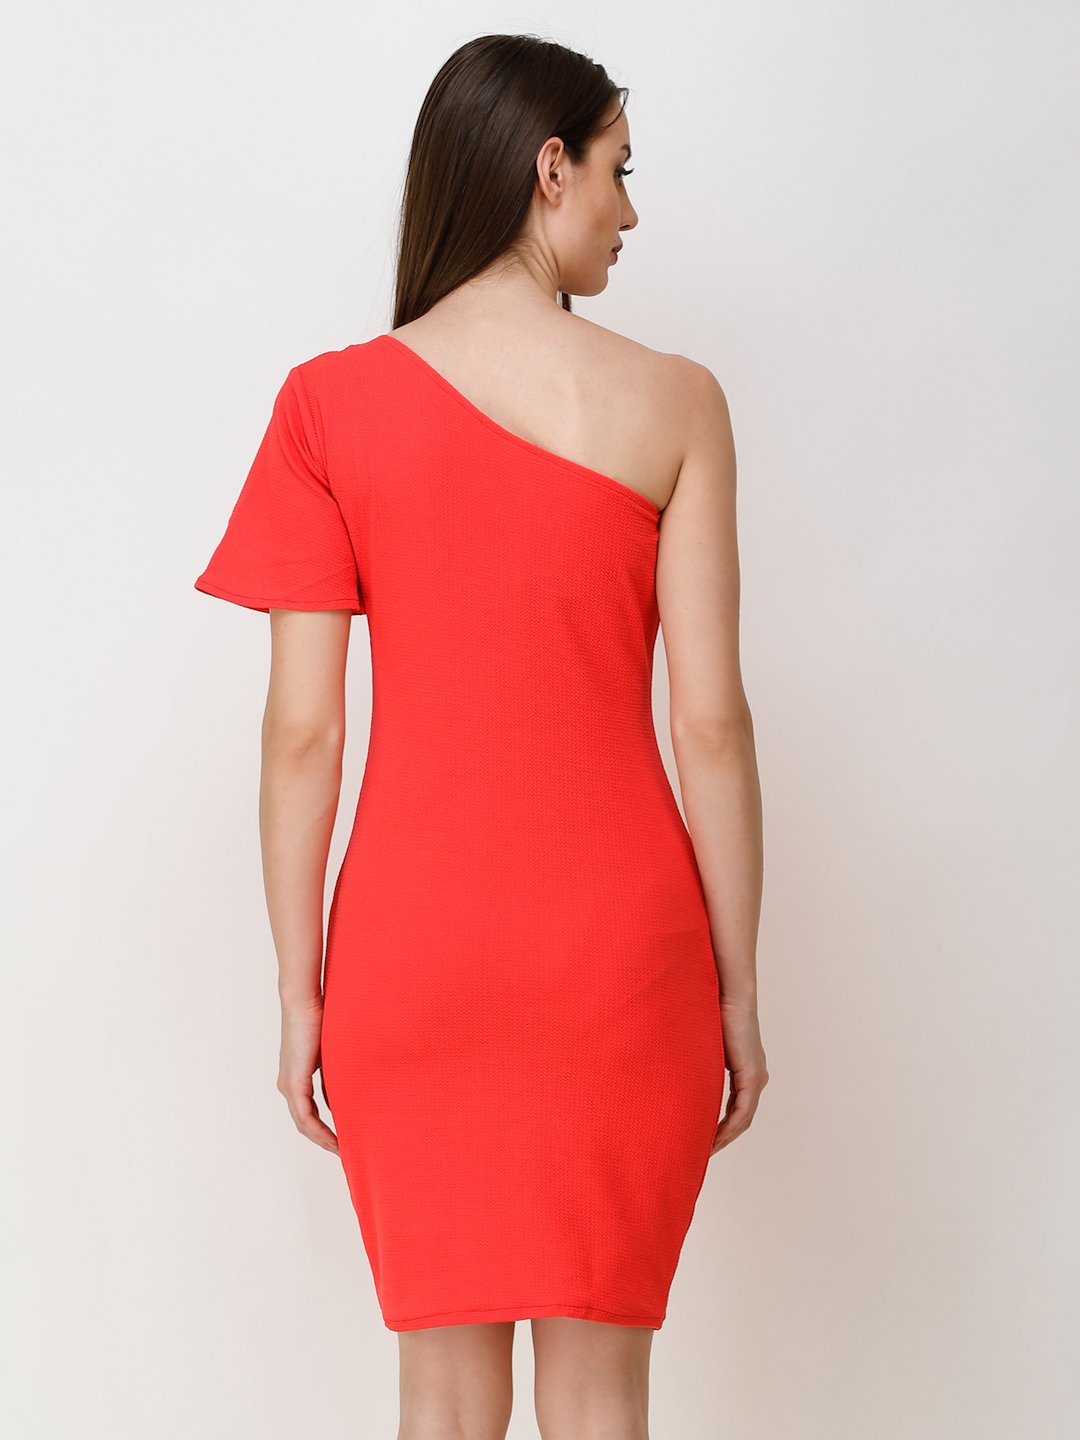 SCORPIUS RED ONE SHOULDER BODYCON DRESS